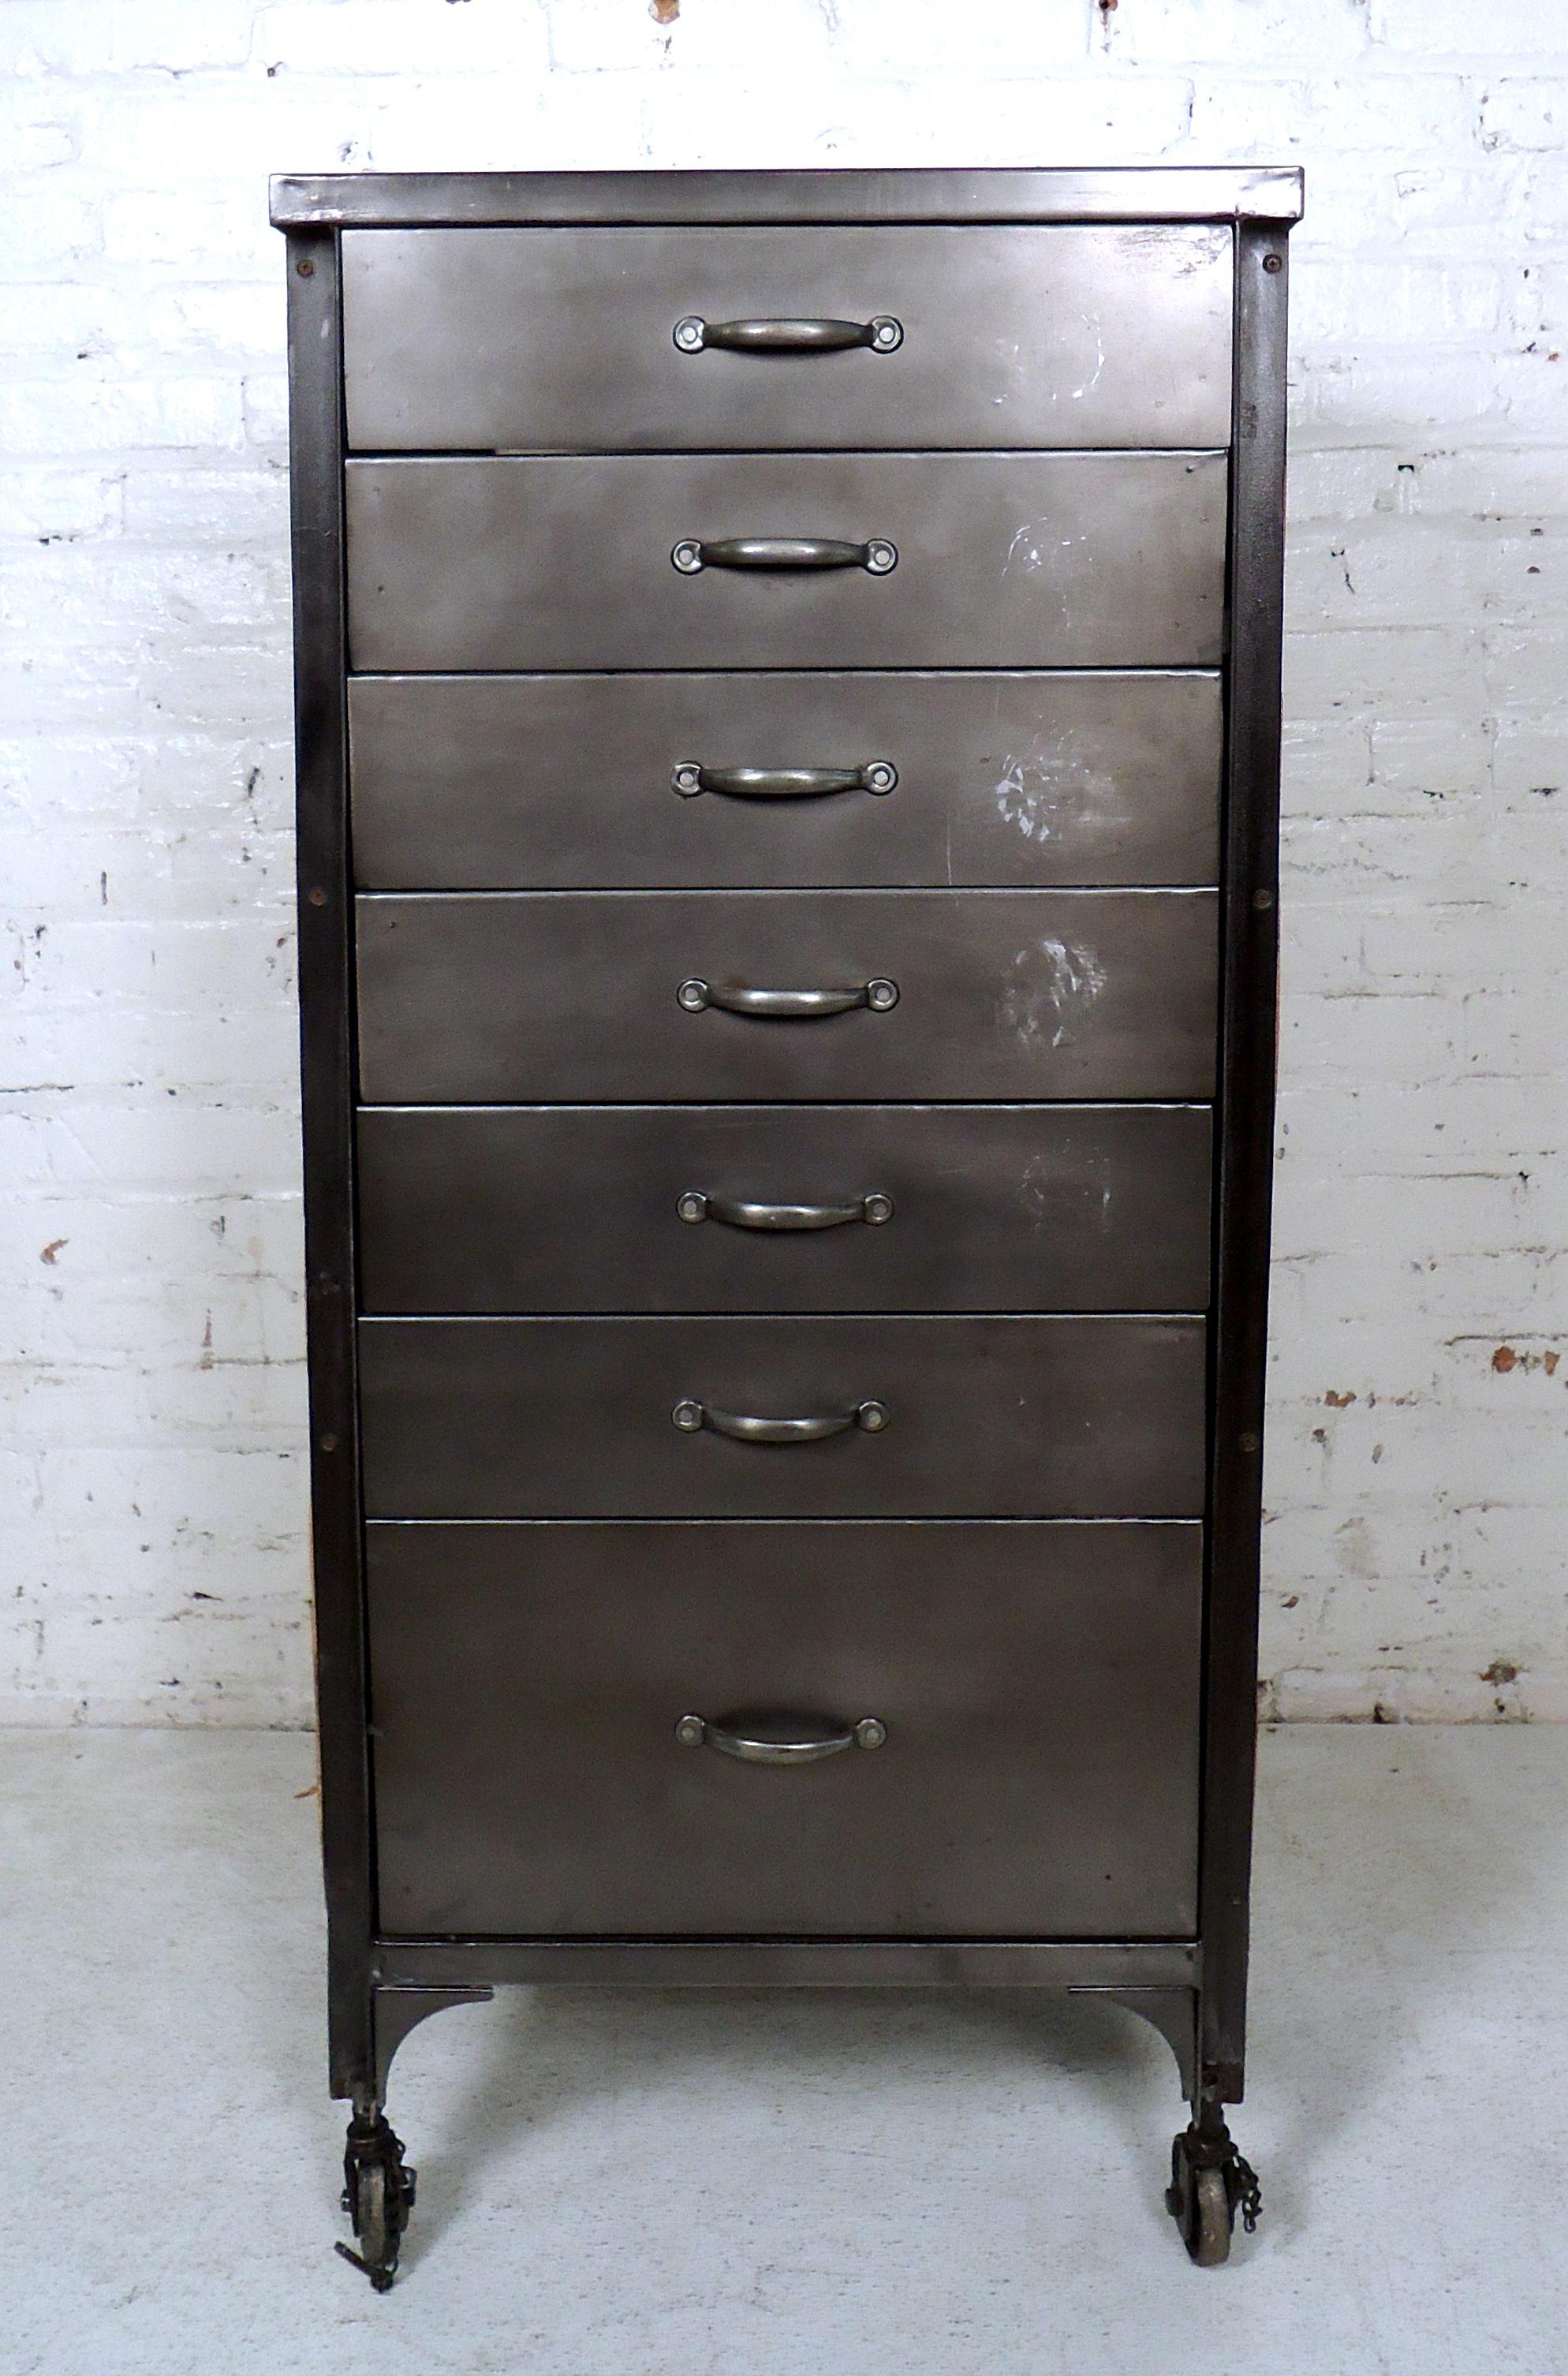 Vintage style cabinet made of reclaimed wood and metal with seven drawers for storage. Small casters add to the Machine Age style.

(Please confirm item location - NY or NJ - with dealer).
   